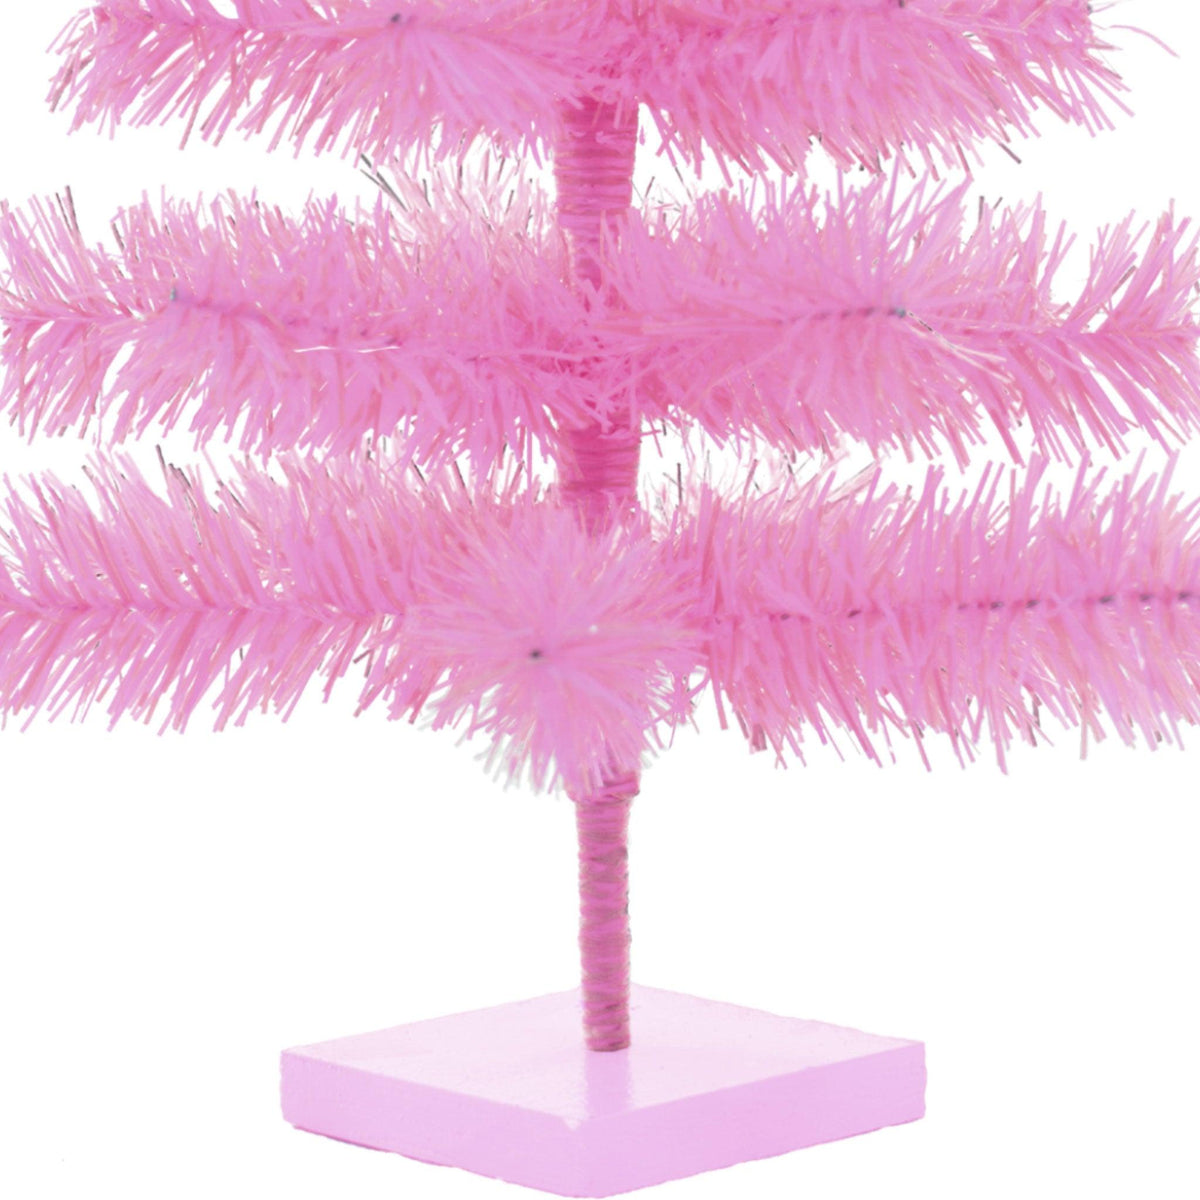 24 inch trees come with a wooden single tiered base painted pink to match the color of your tree.